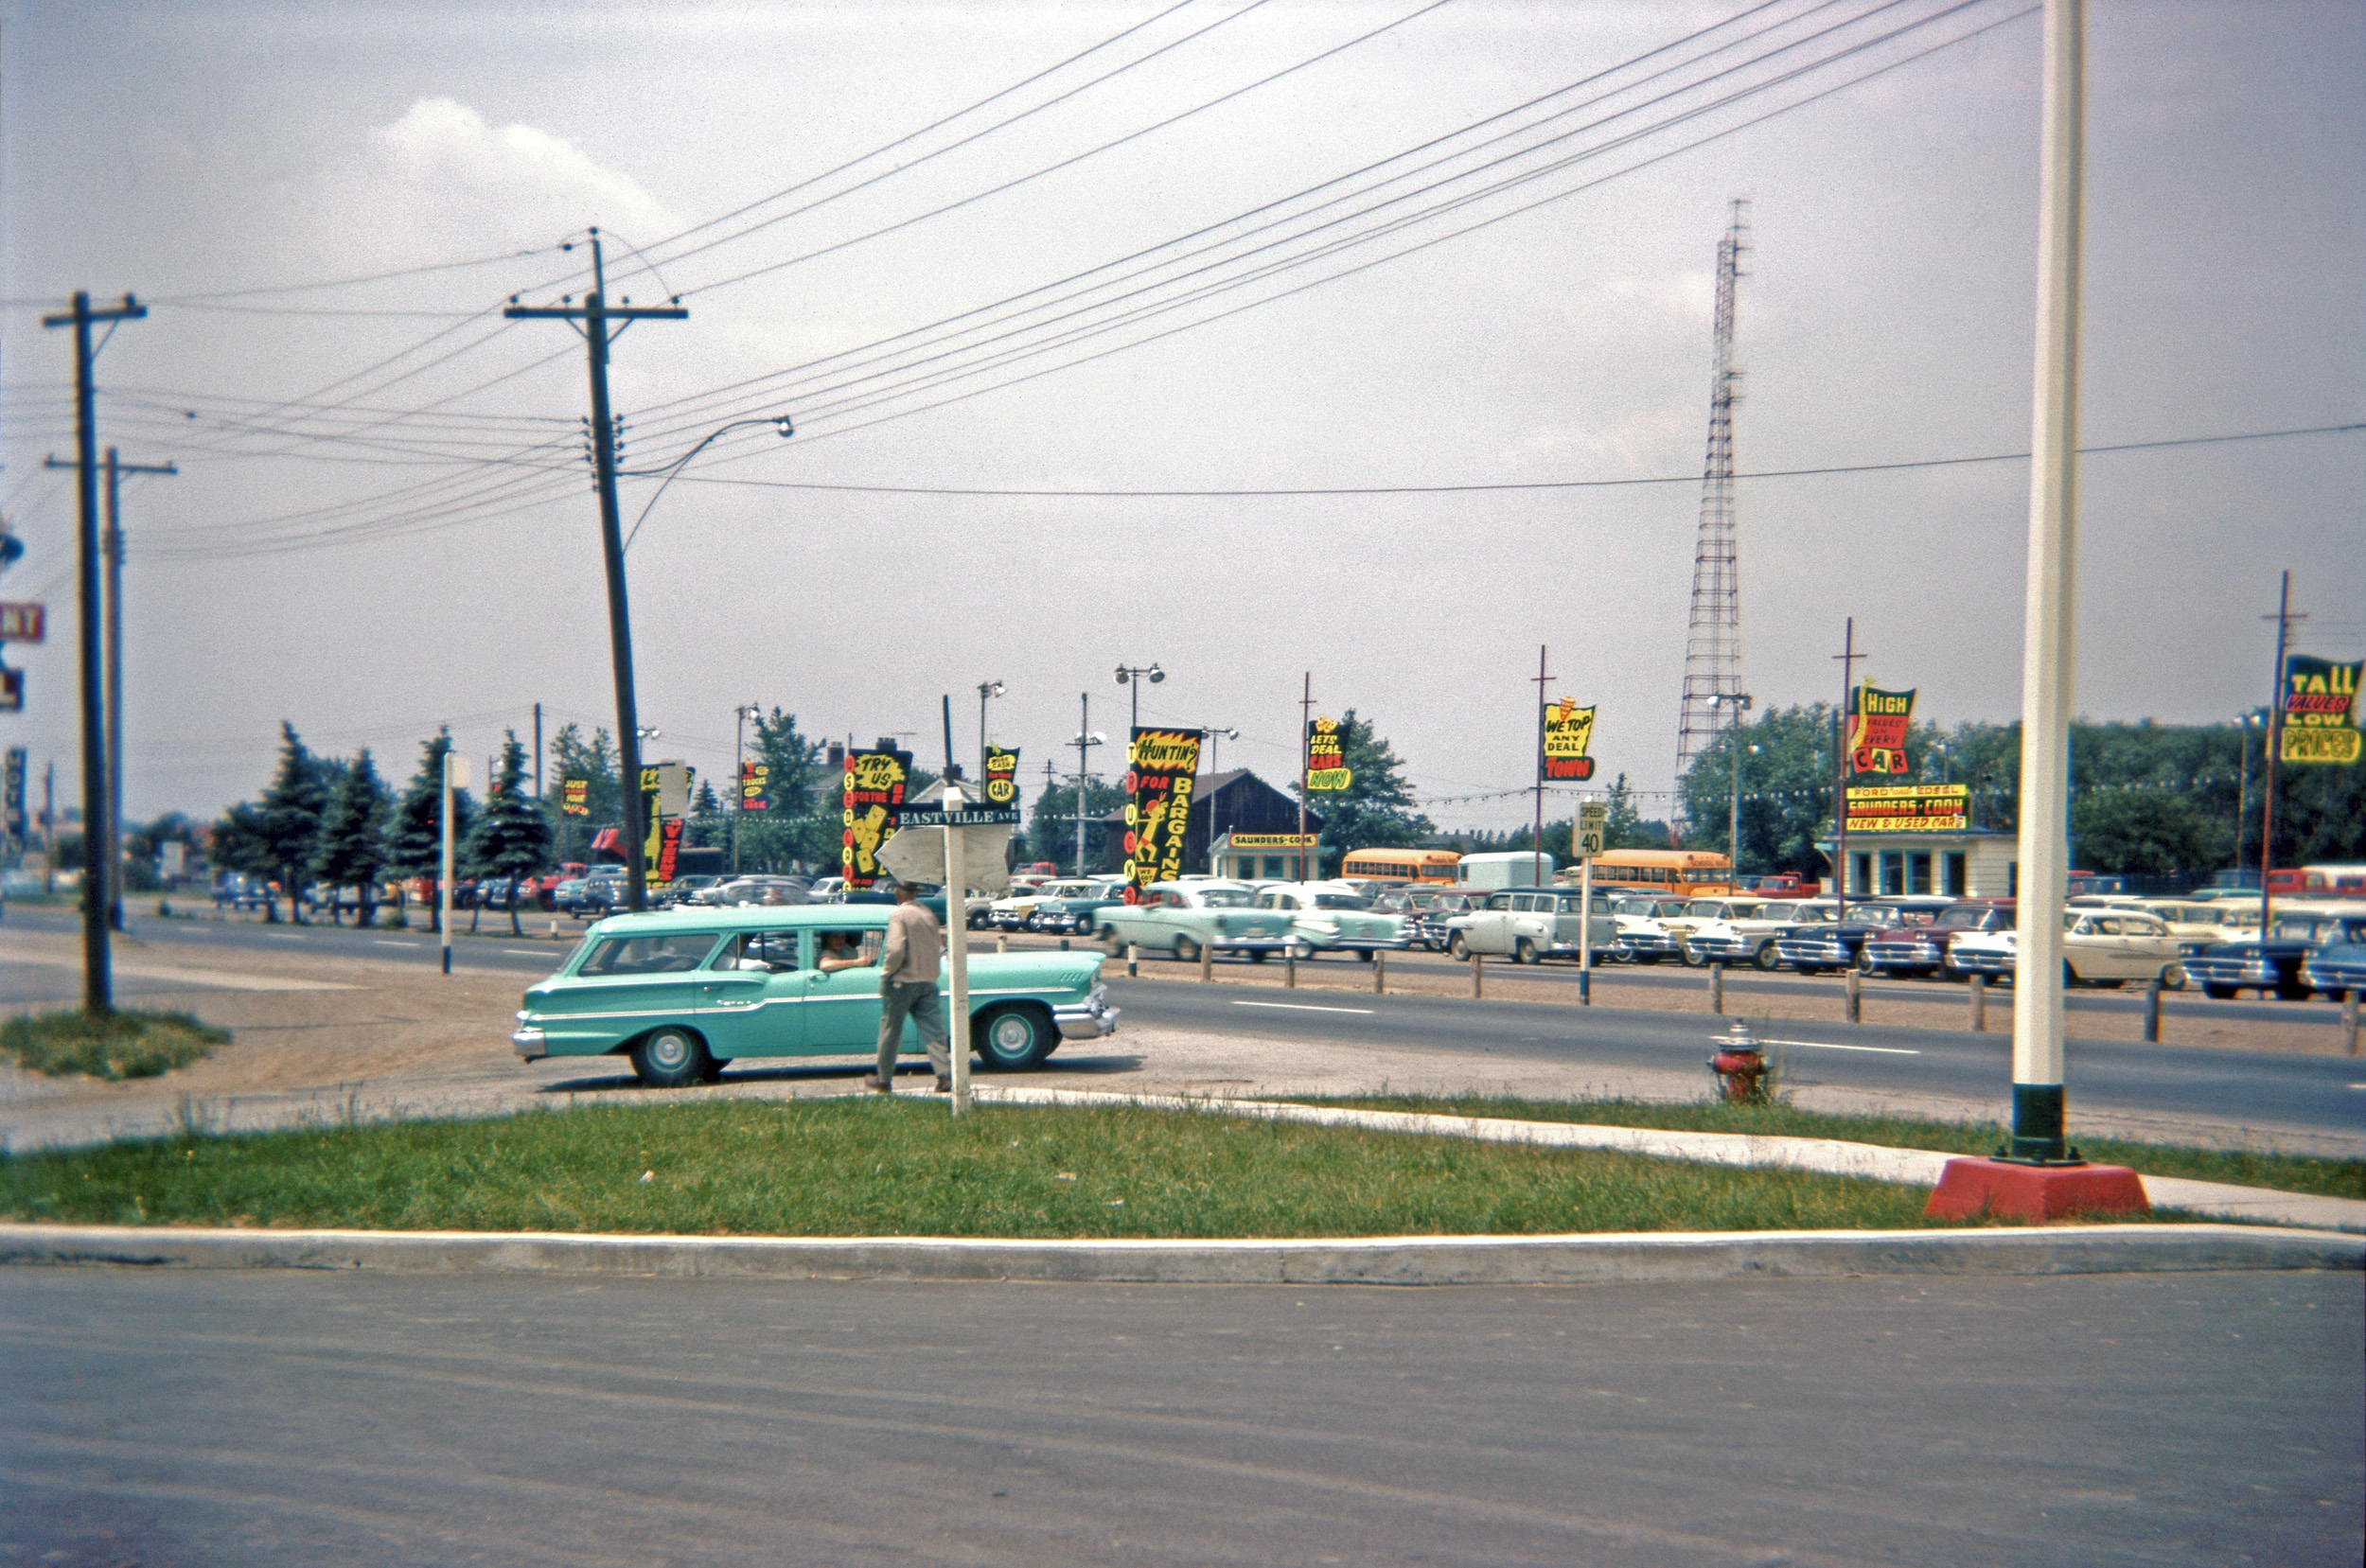 Another Ontario, Canada auto dealer, near the one shown here. A Kodachrome slide I acquired. View full size.